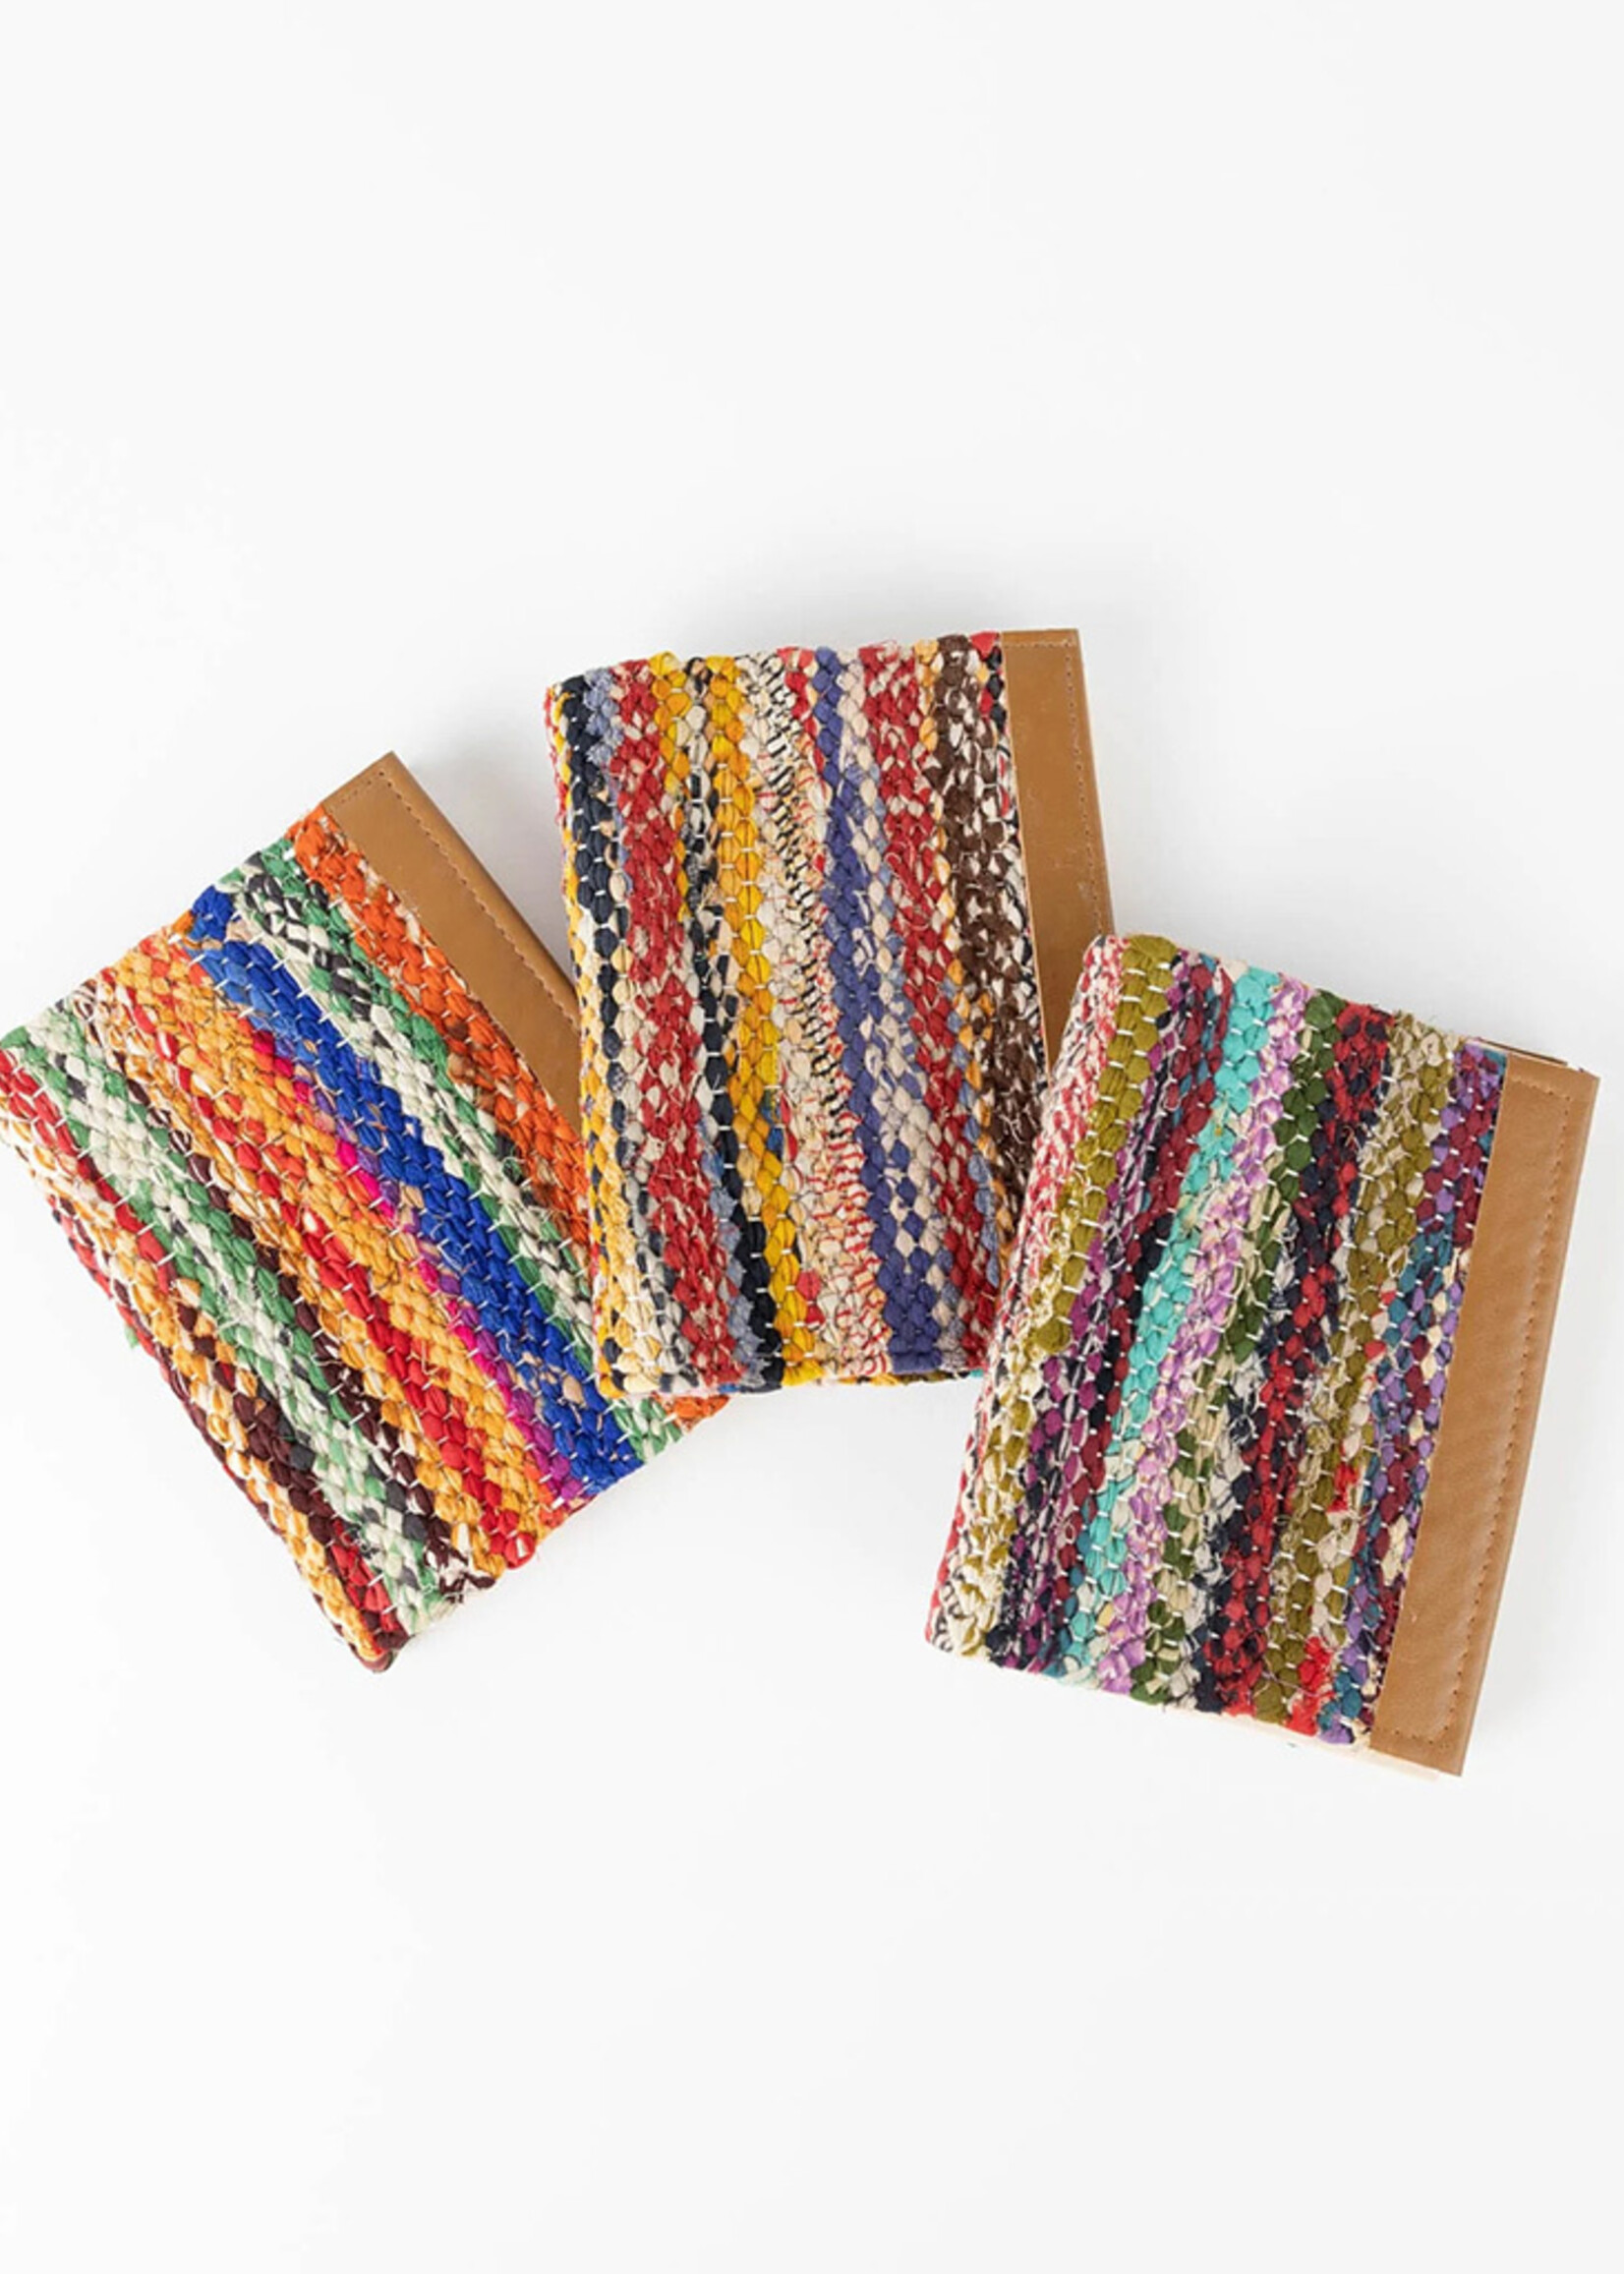 Ten Thousand Villages Small Woven Recycled Sari Journal